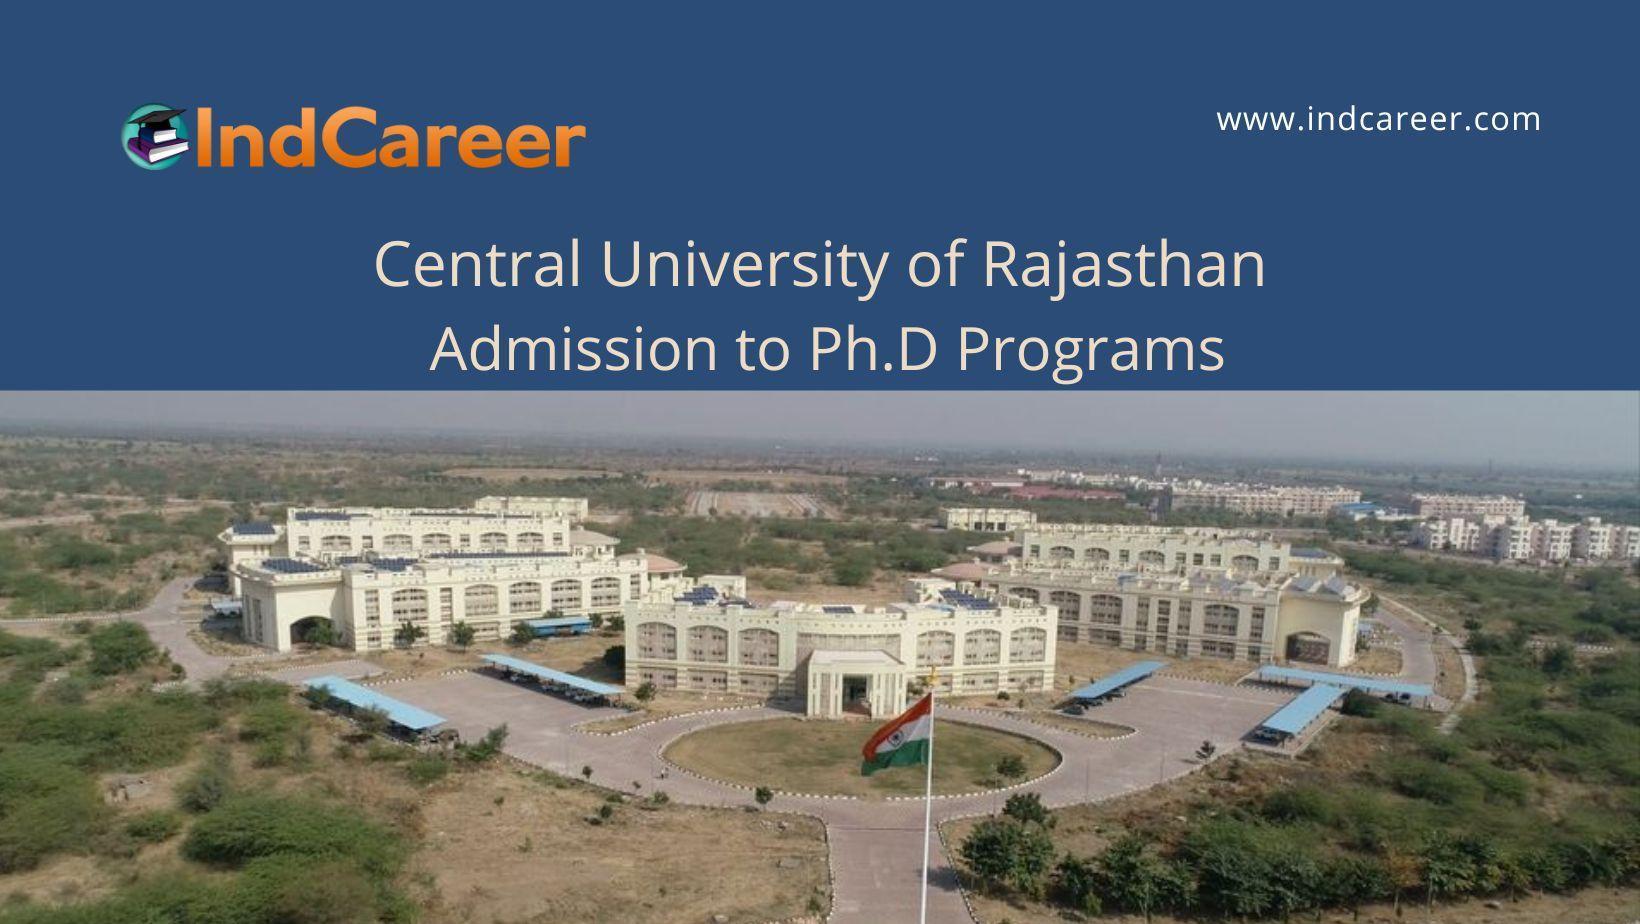 university for phd in rajasthan